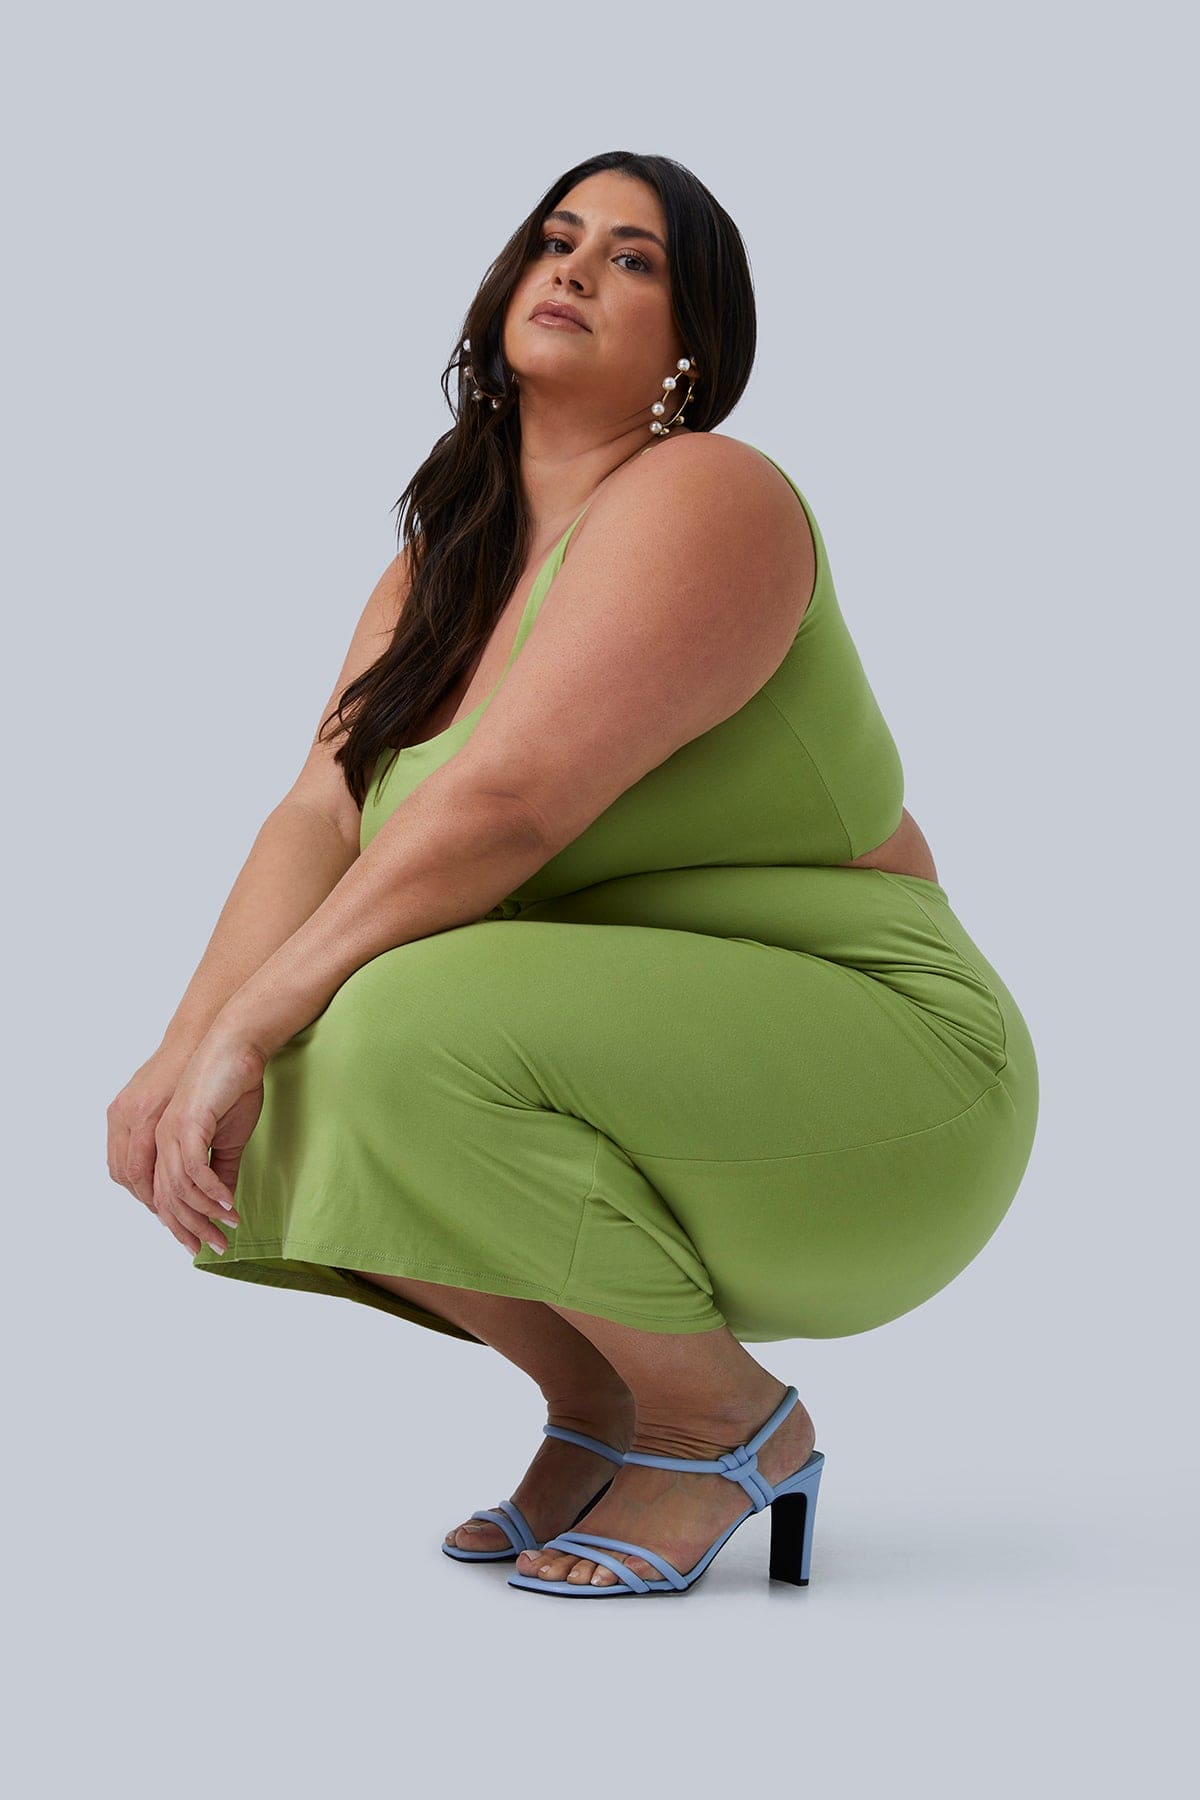 Founder of Gia IRL, Gia Sinatra, squatting and posing in Gigi Midi Dress size 1X from her Plus Size Boutique Gia IRL! The best plus size fashion for women available on the market.